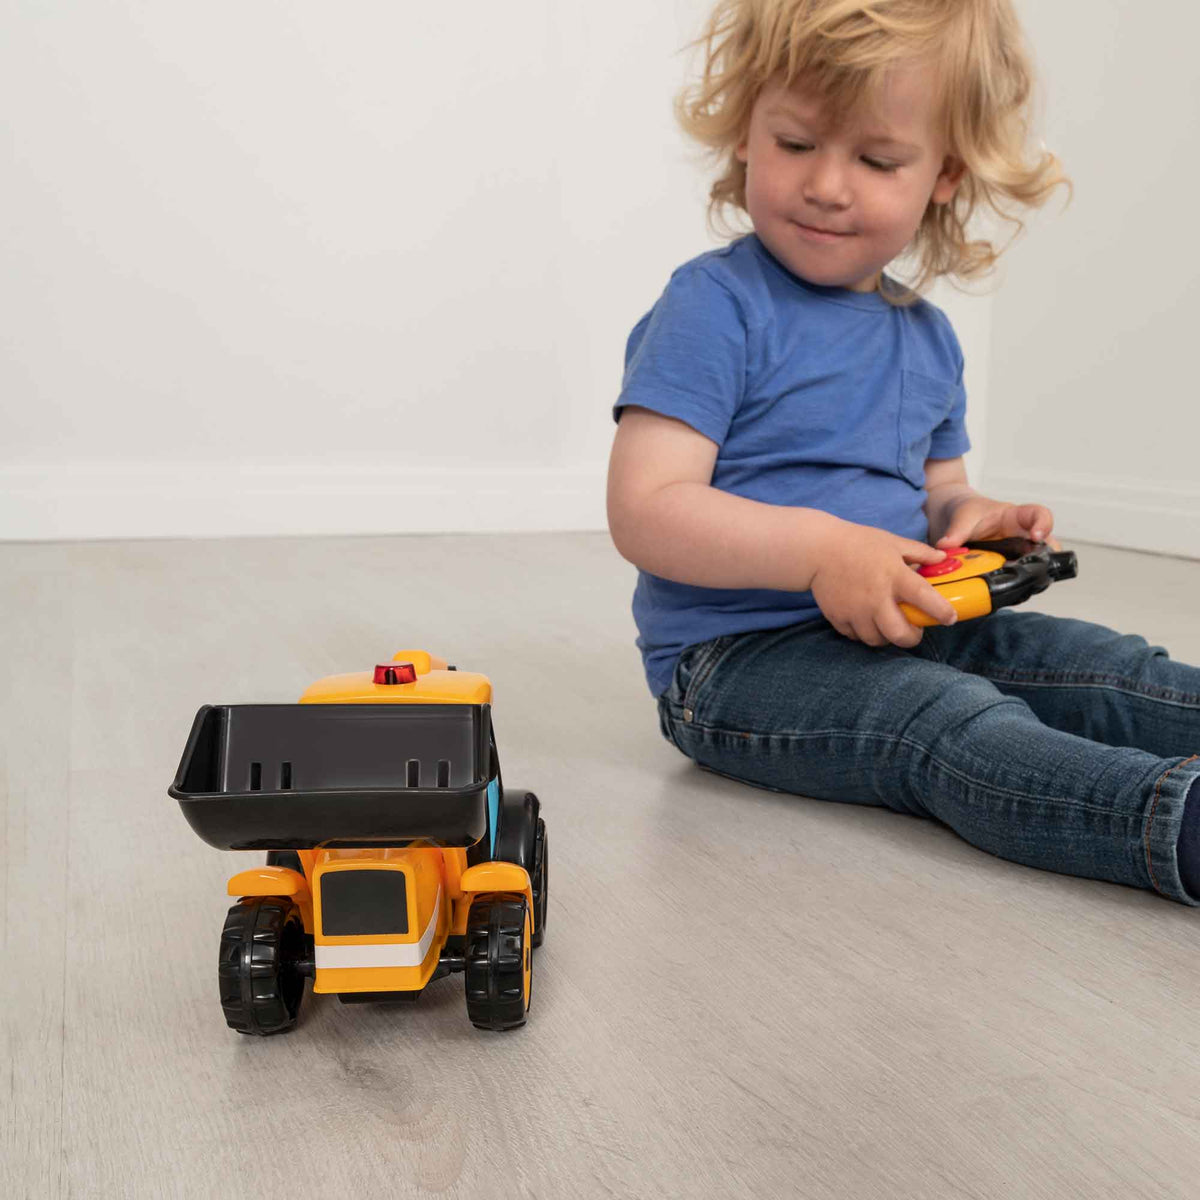 Teamsterz JCB My First Joey Digger Truck | Remote Control Construction Toy